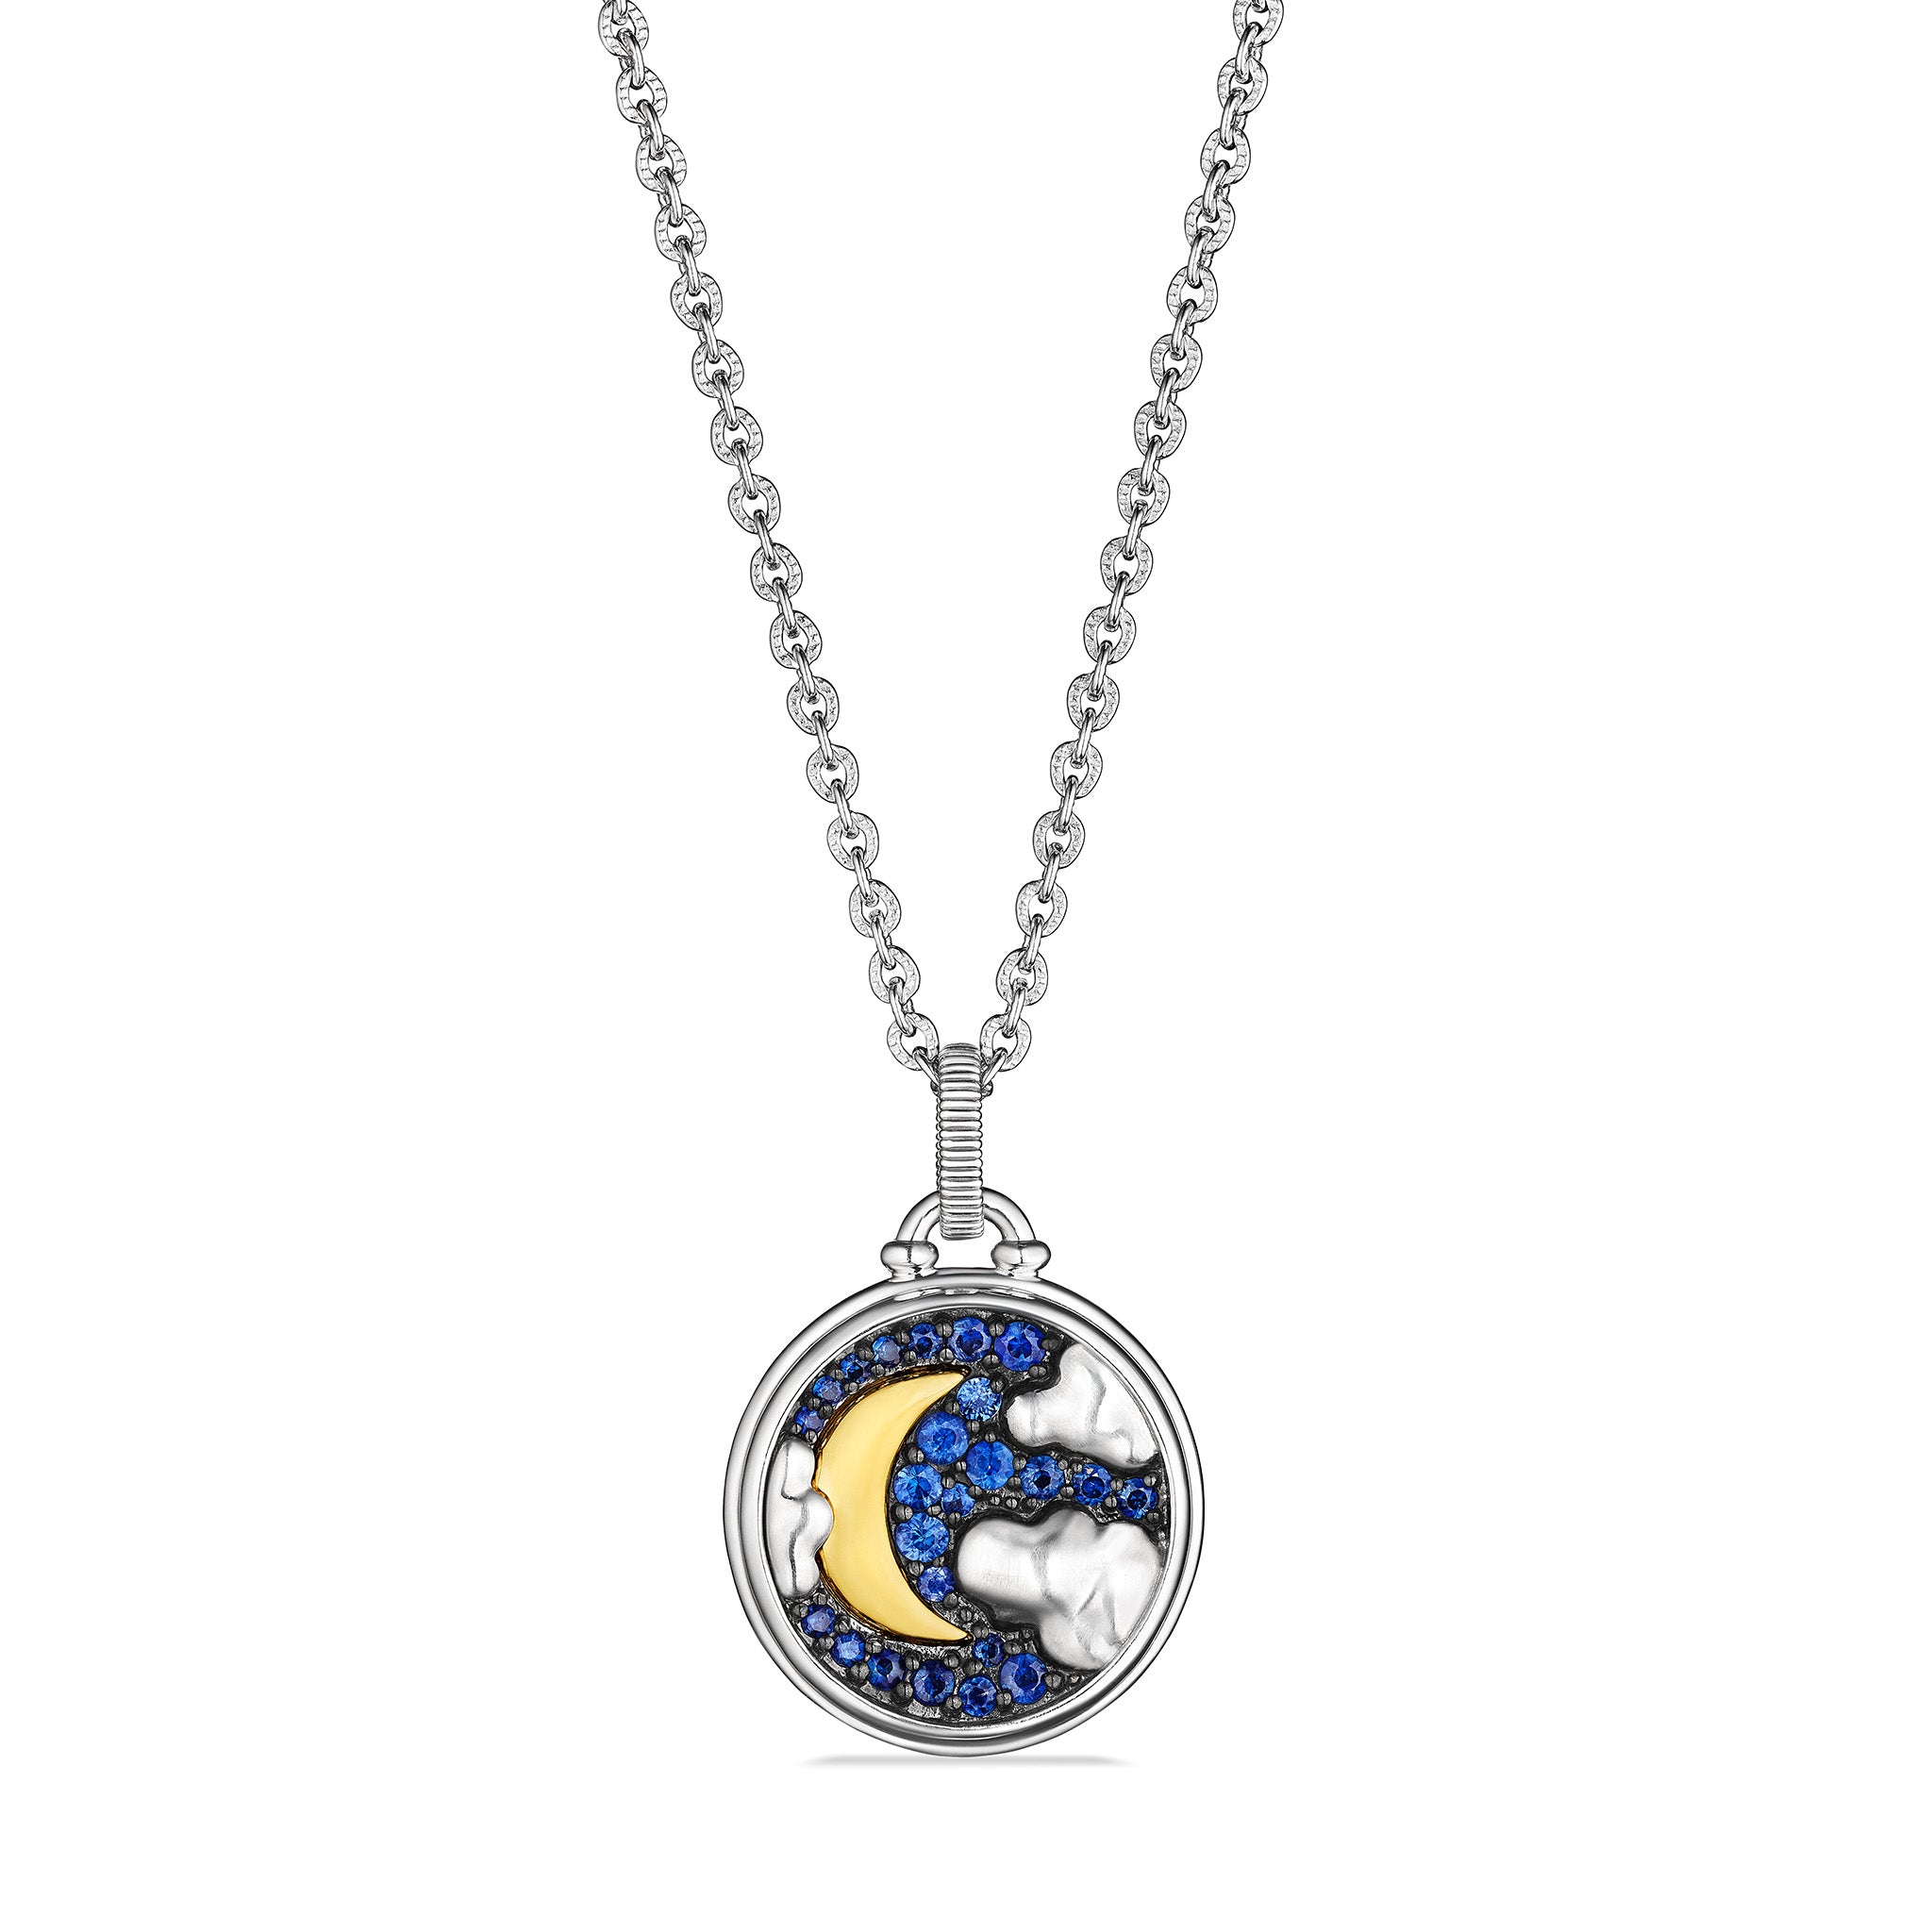 Little Luxuries Night Sky Medallion Necklace With Blue Sapphire, Diamonds And 18K Gold